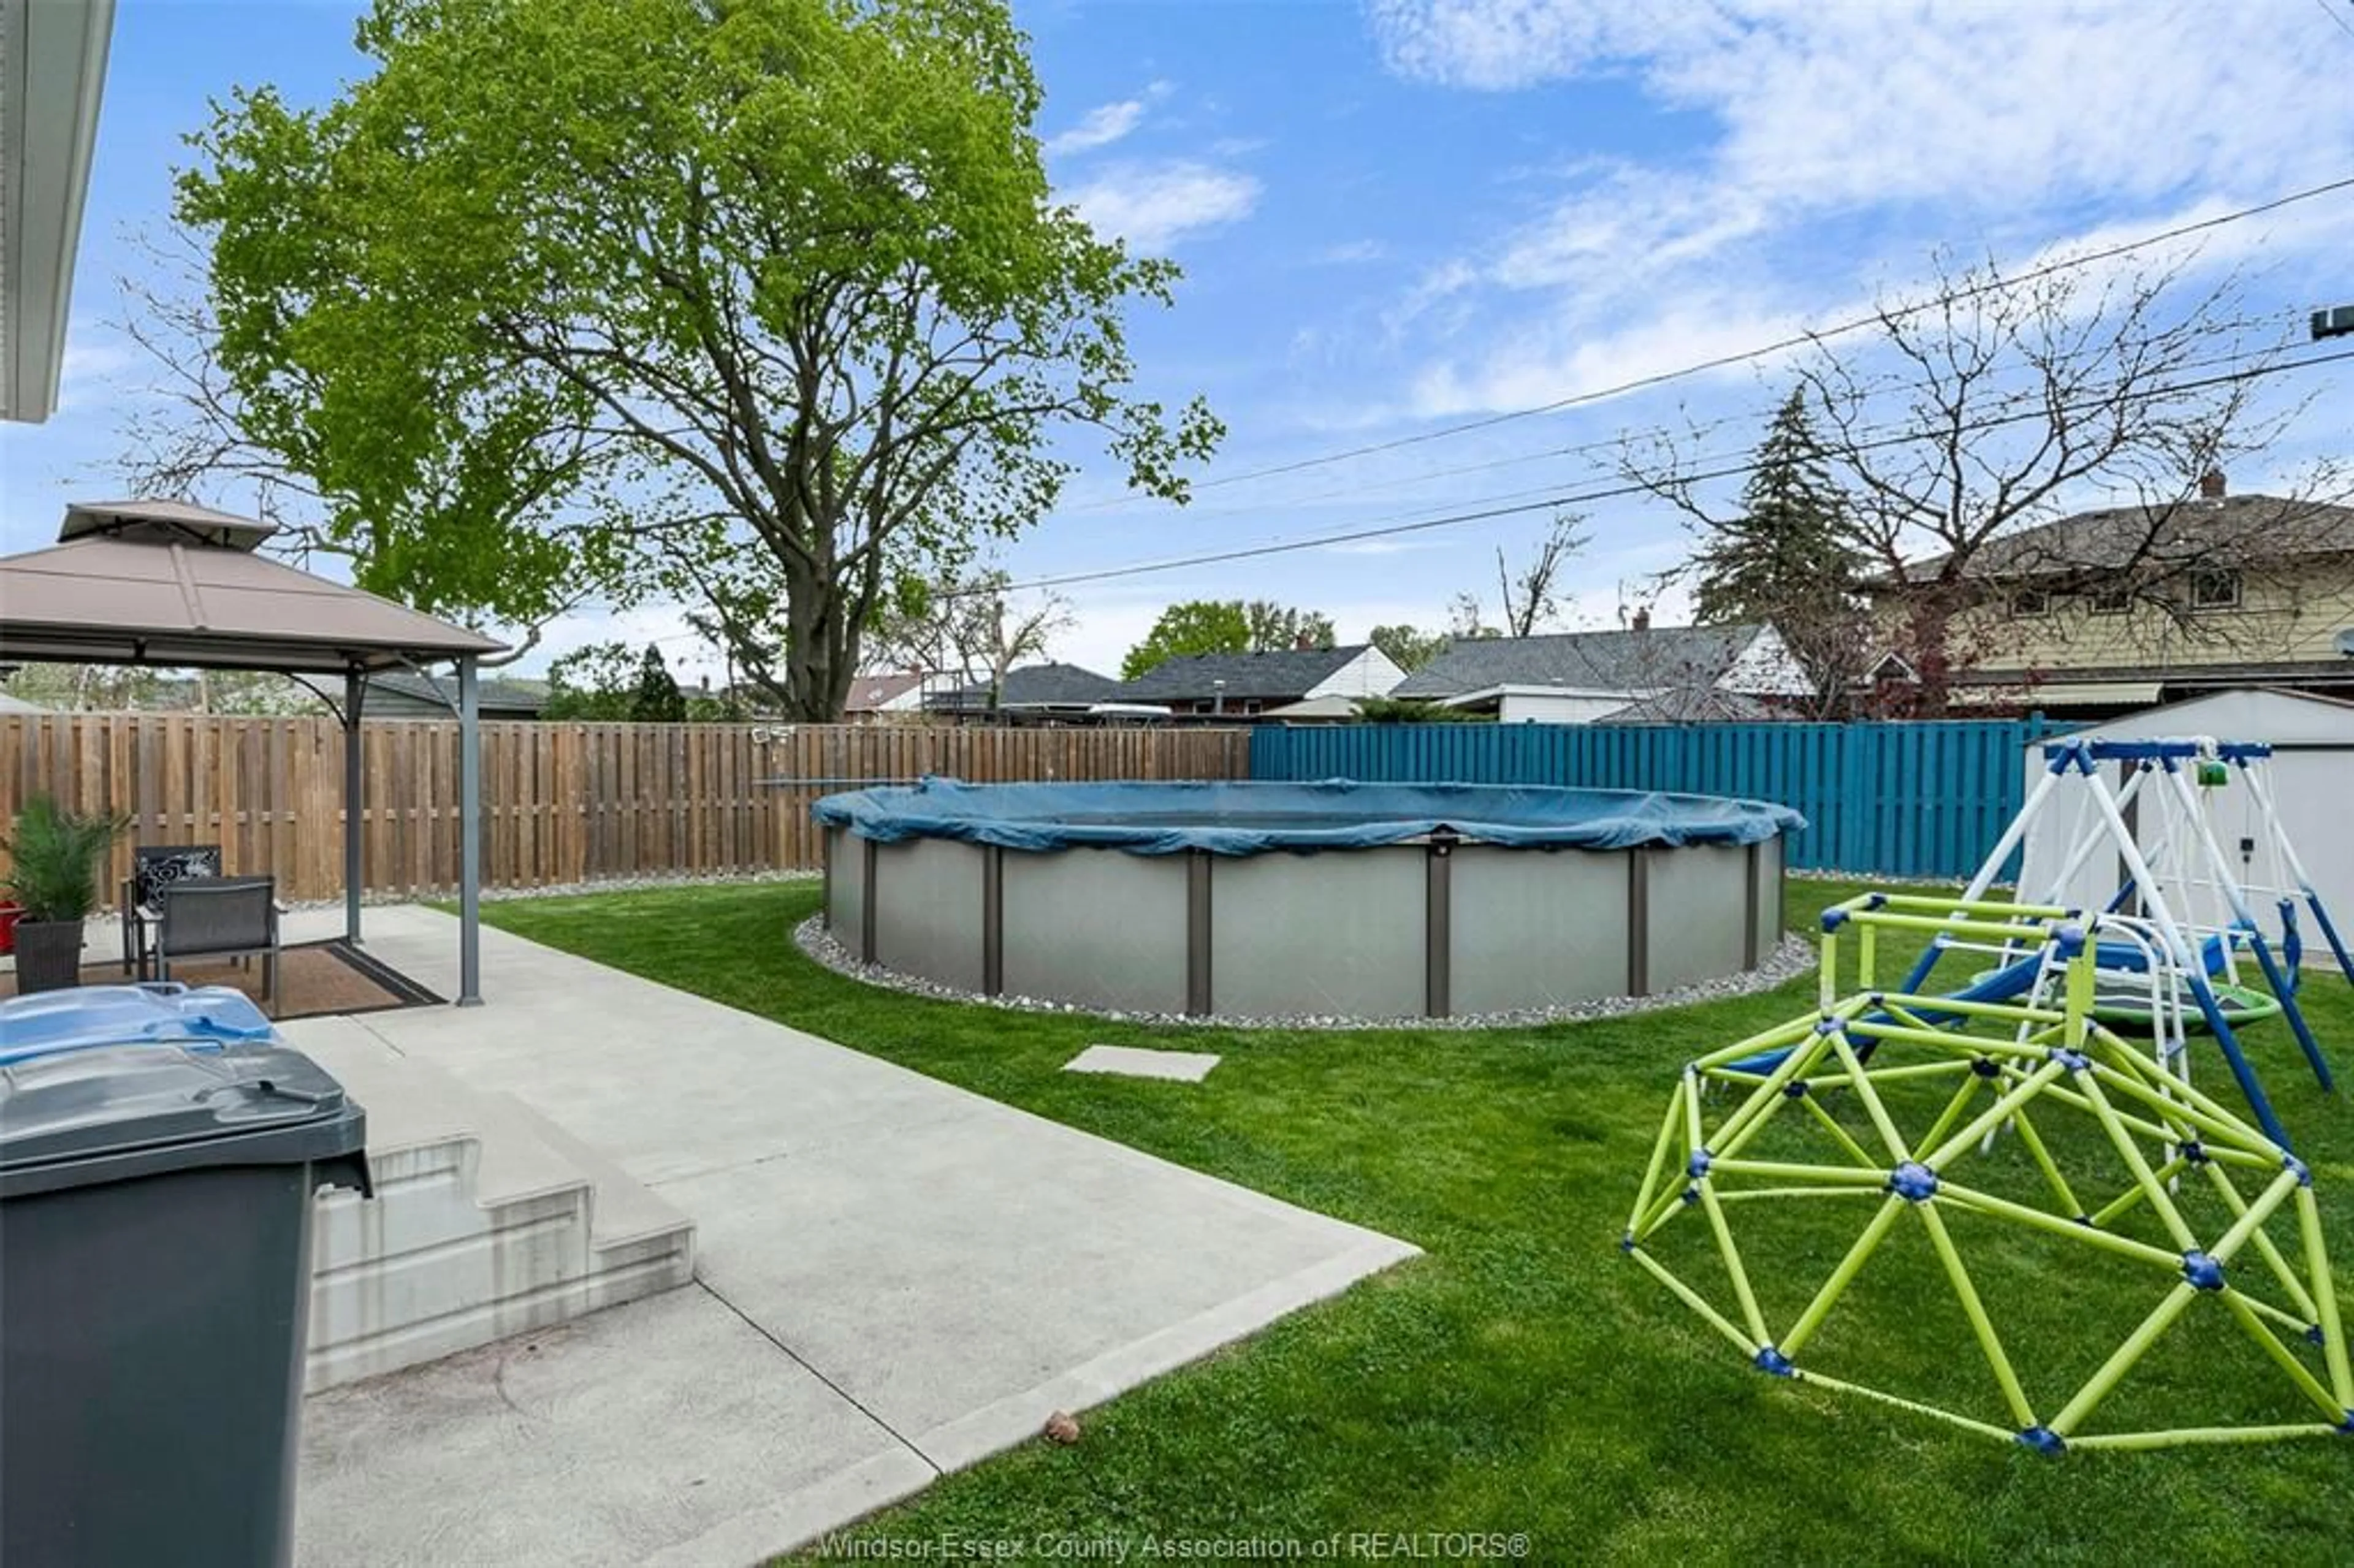 Indoor or outdoor pool for 876 LAPORTE Ave, Windsor Ontario N8S 3R4